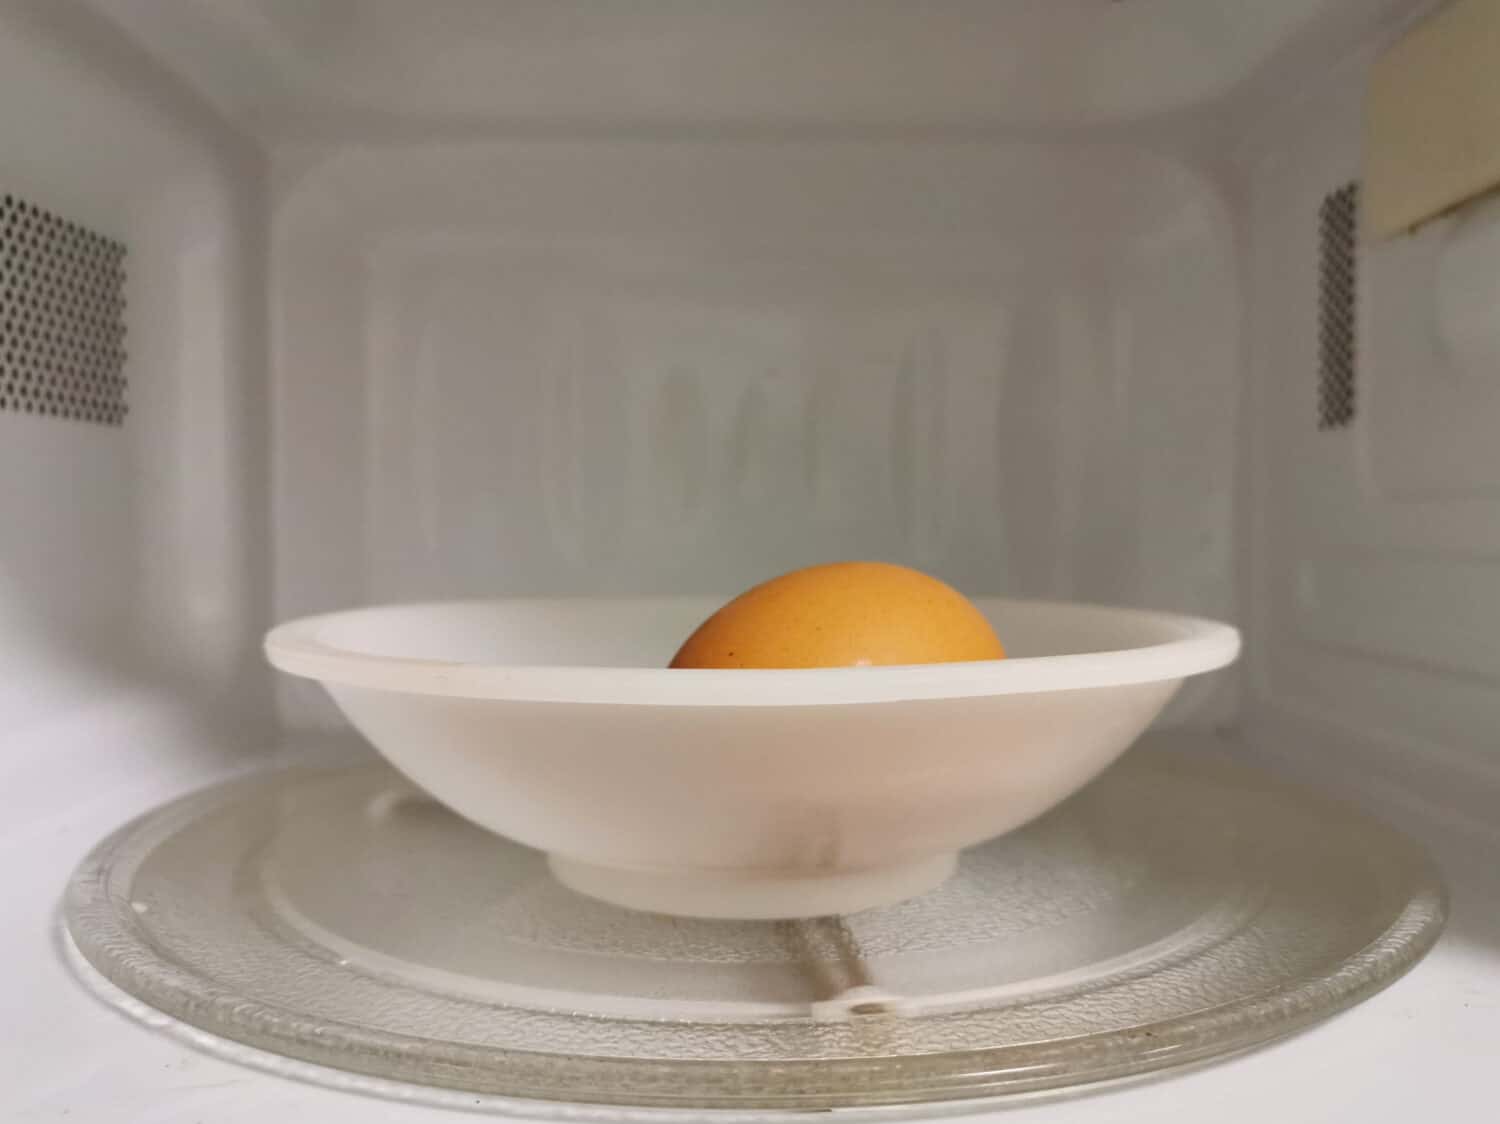 Eggs inside microwave oven. Cooking eggs in the shell in a microwave is very dangerous.